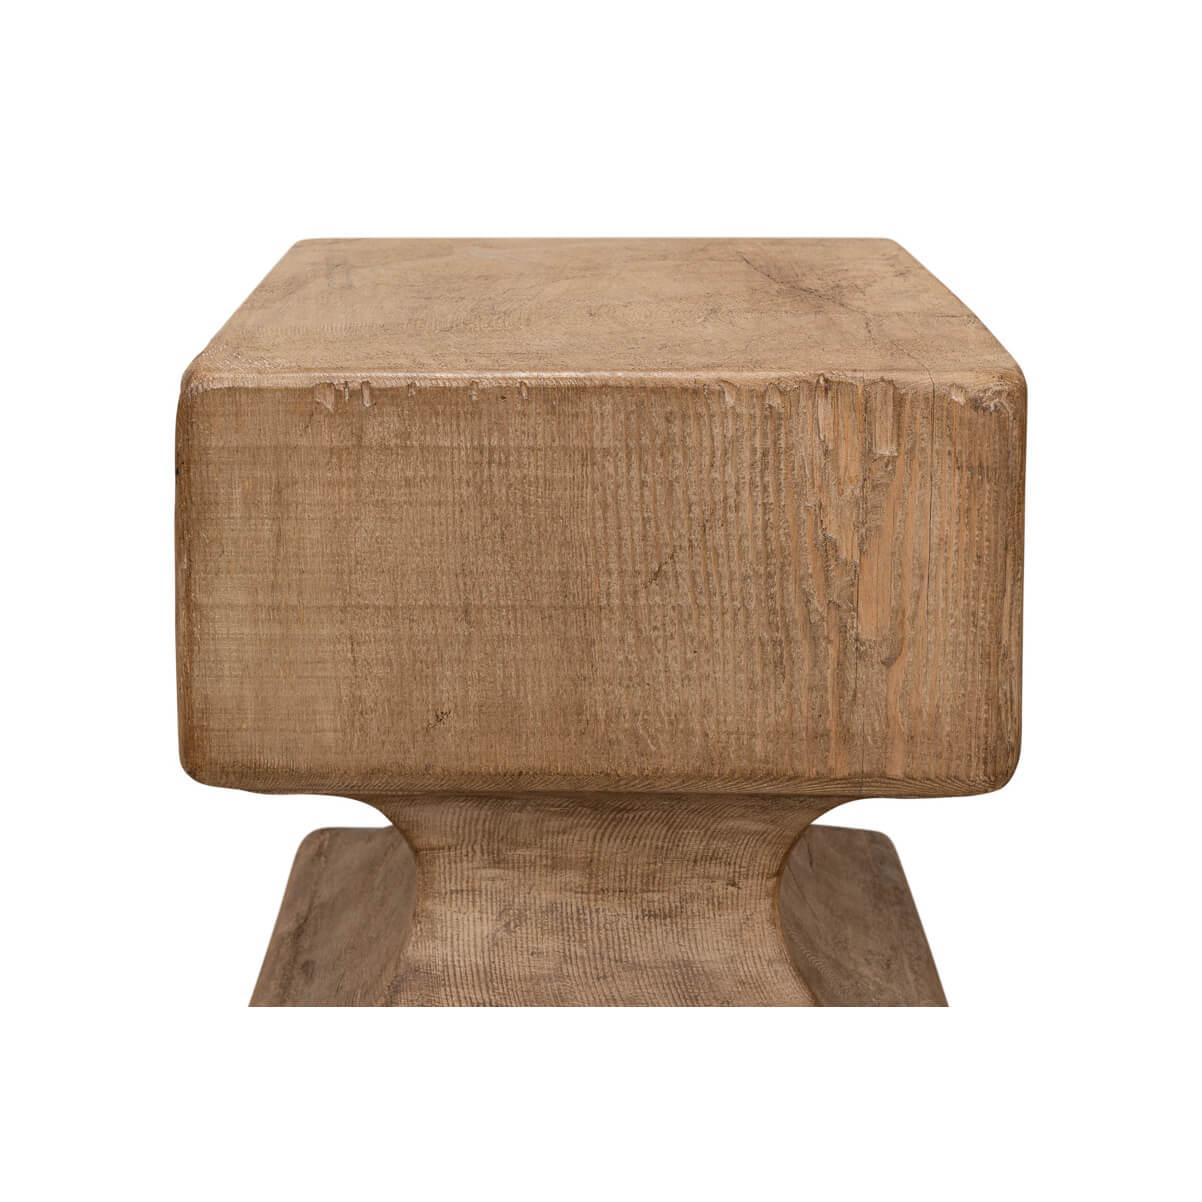 Asian Wooden Beam Stool For Sale